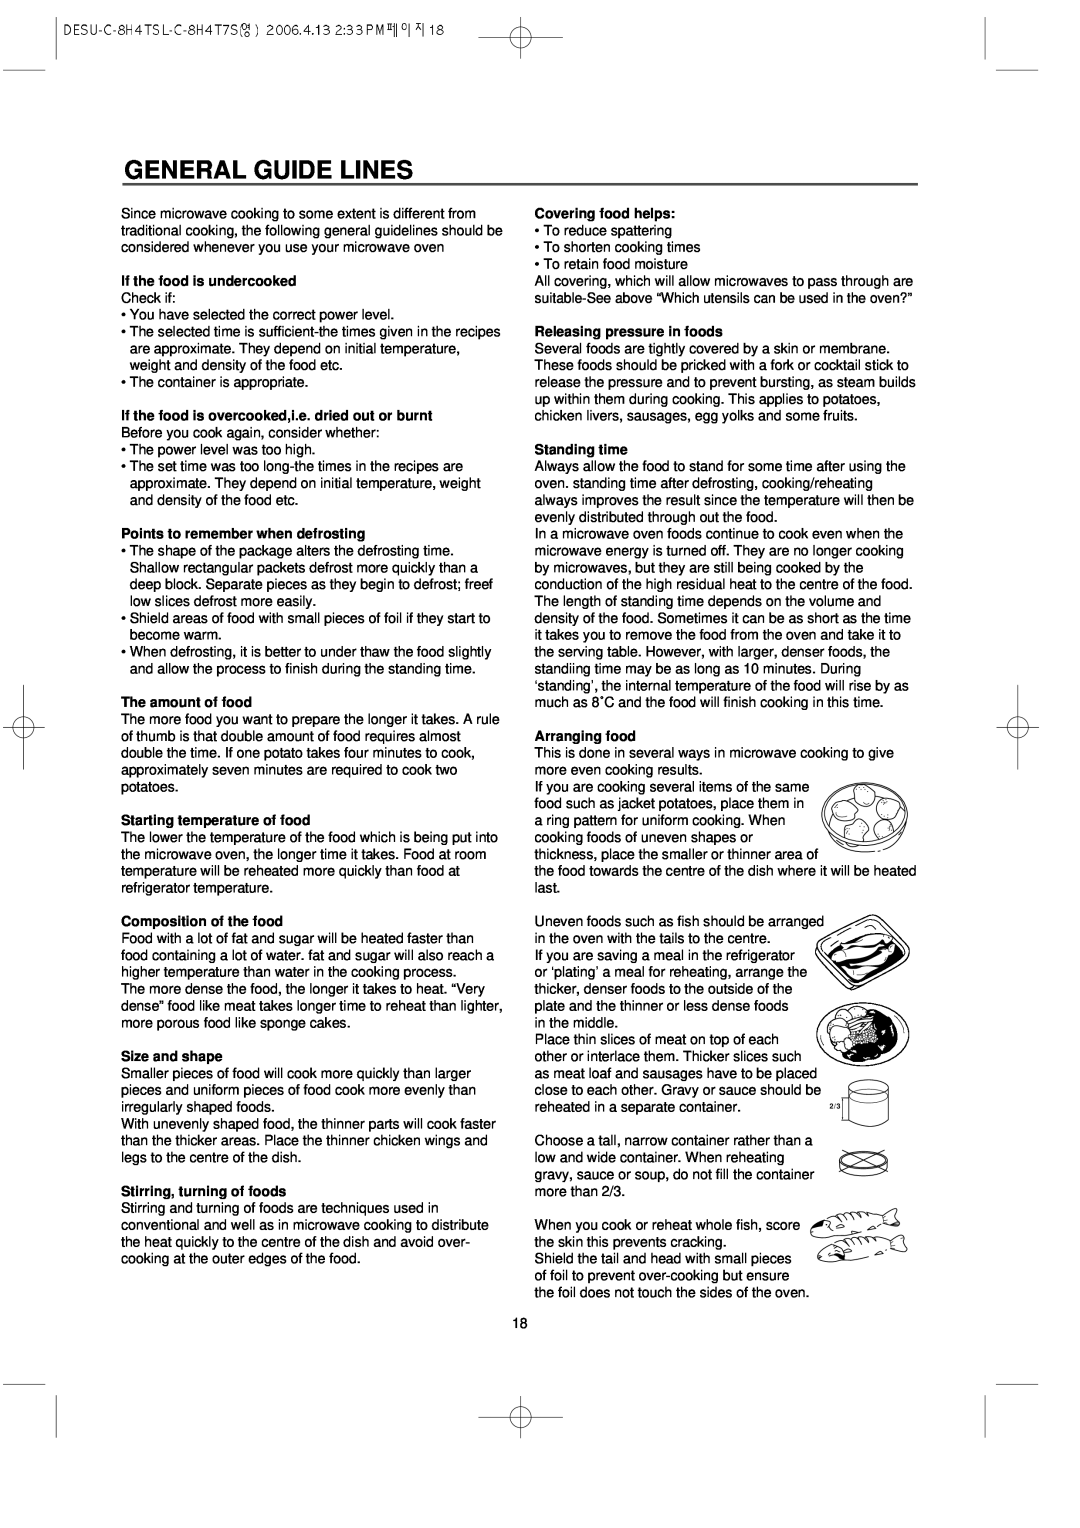 Daewoo KOC-8H4TSL General Guide Lines, If the food is undercooked, Points to remember when defrosting, The amount of food 